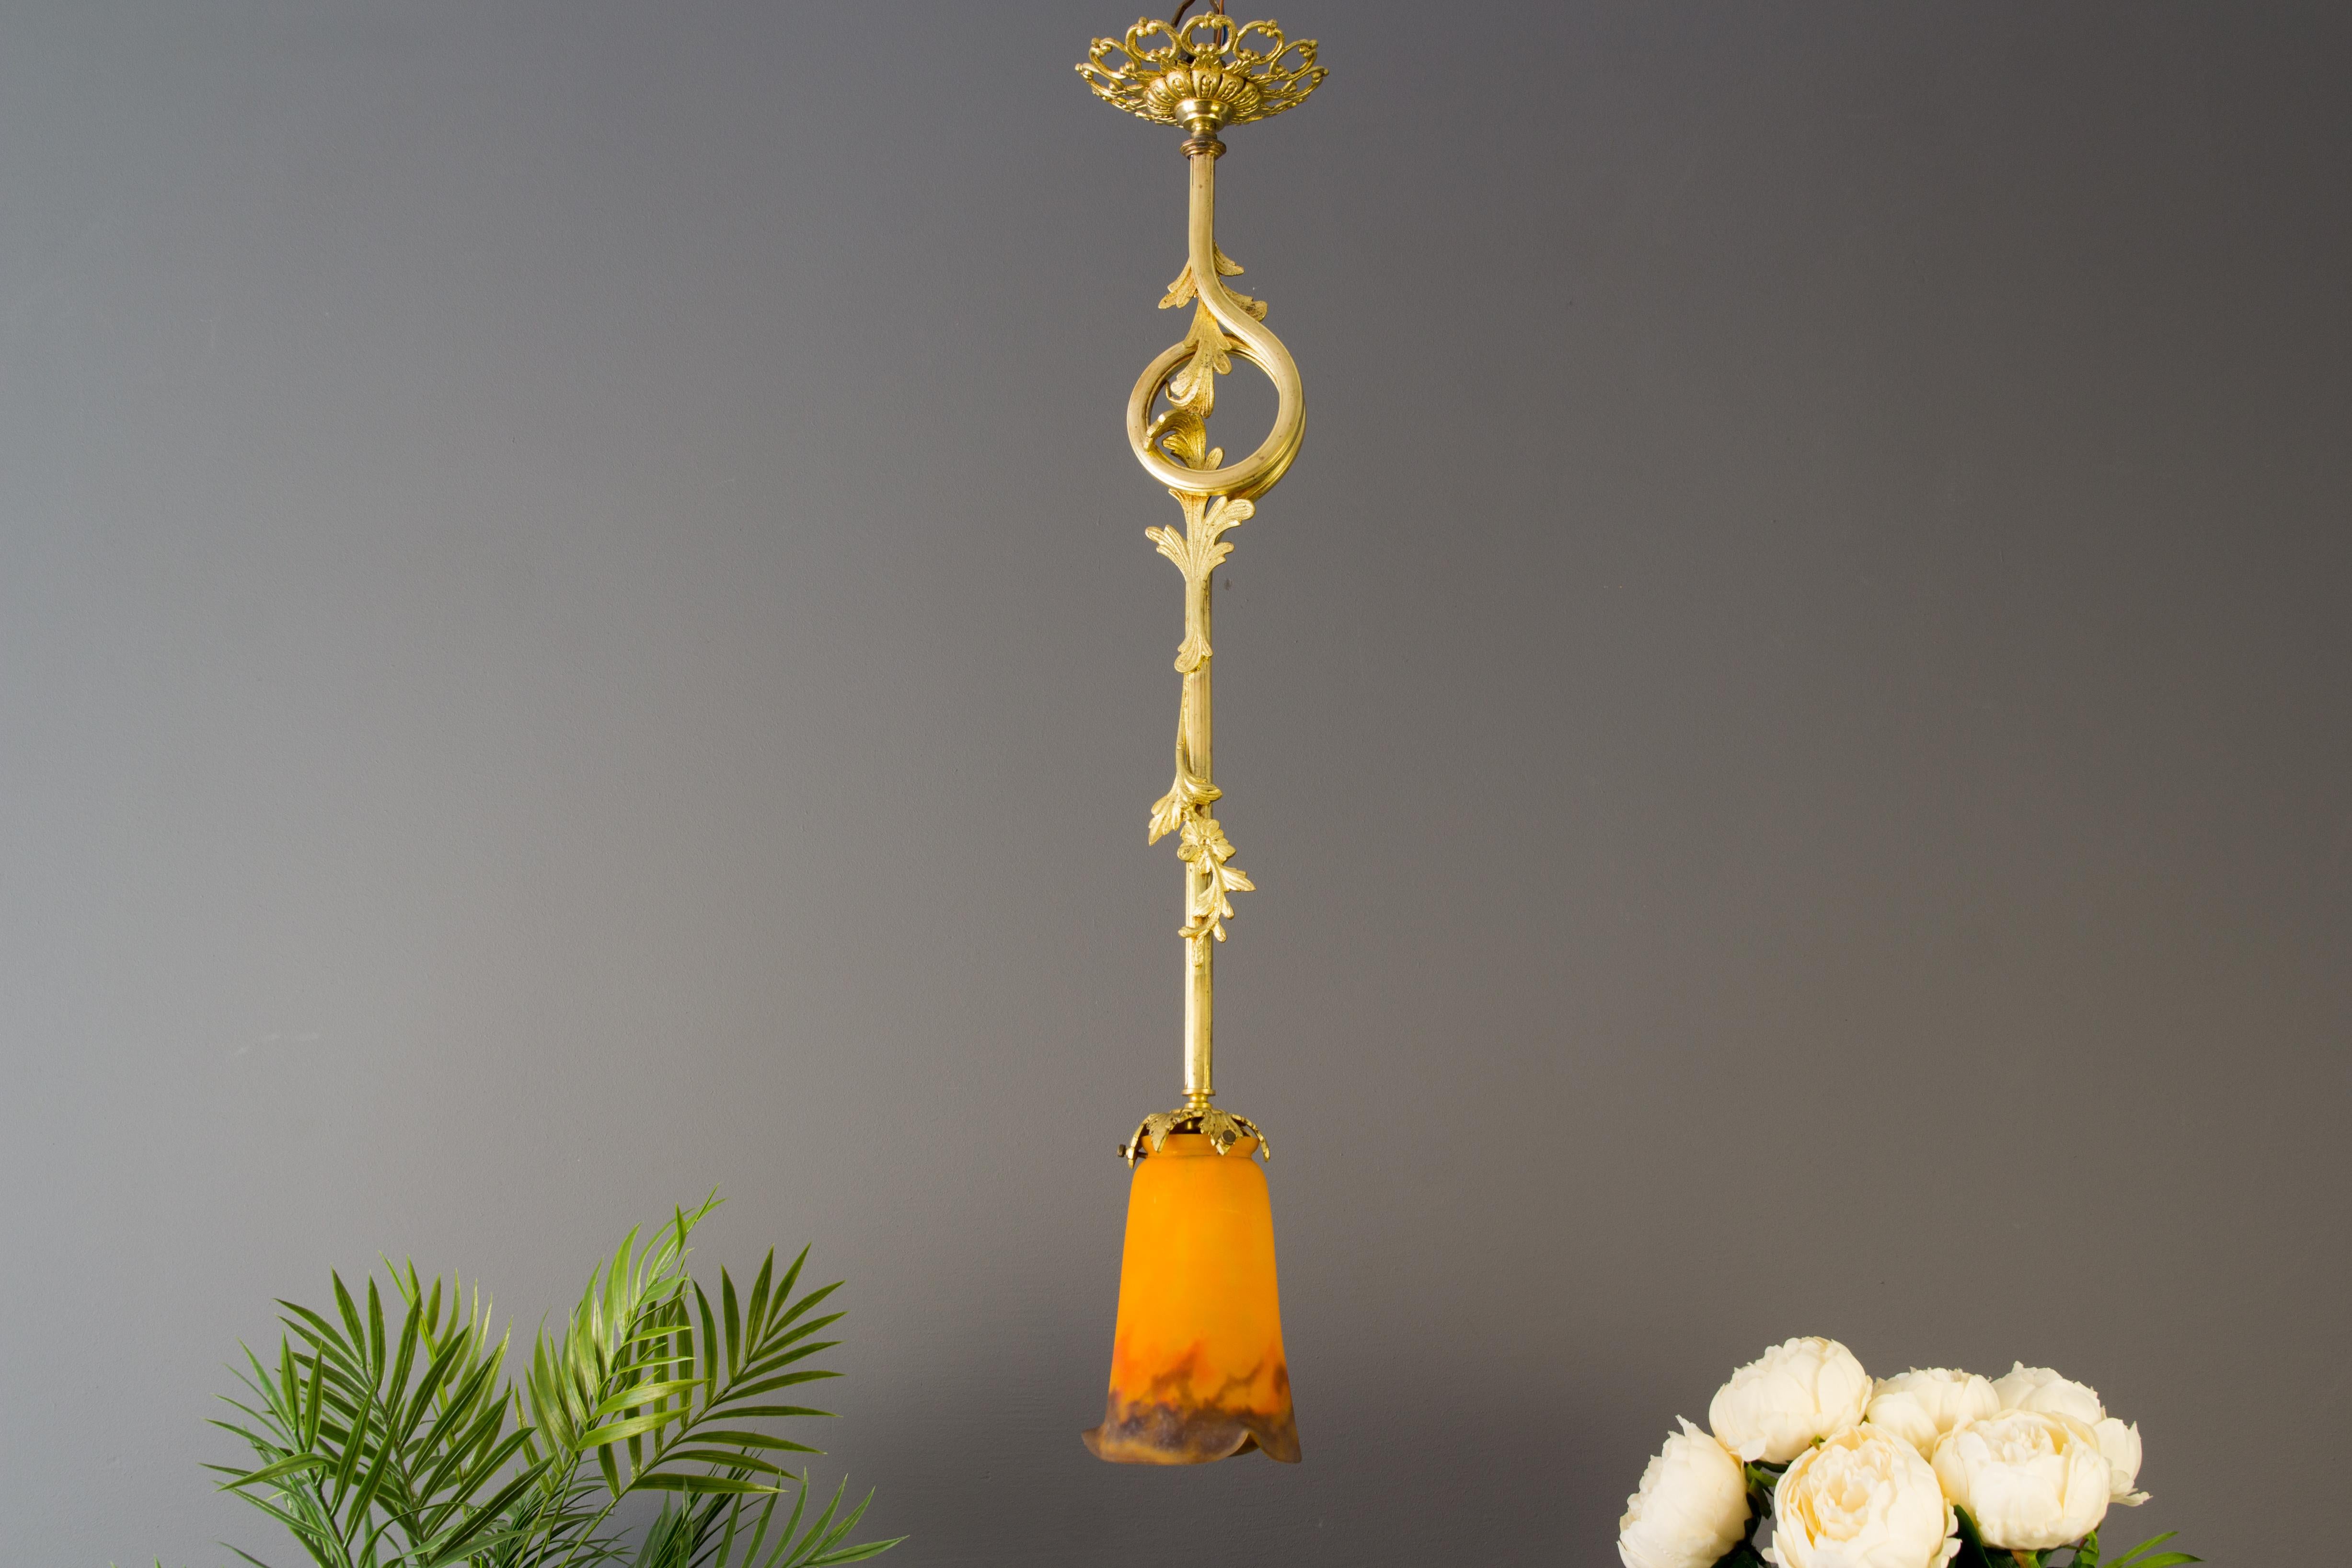 French bronze pendant light fixture with orange and purple glass paste lampshade by Muller Freres Luneville. One socket for the E27 (E26) light bulb.
Dimensions: diameter: 13 cm / 5.11 in; height: 70 cm / 27.55 in.